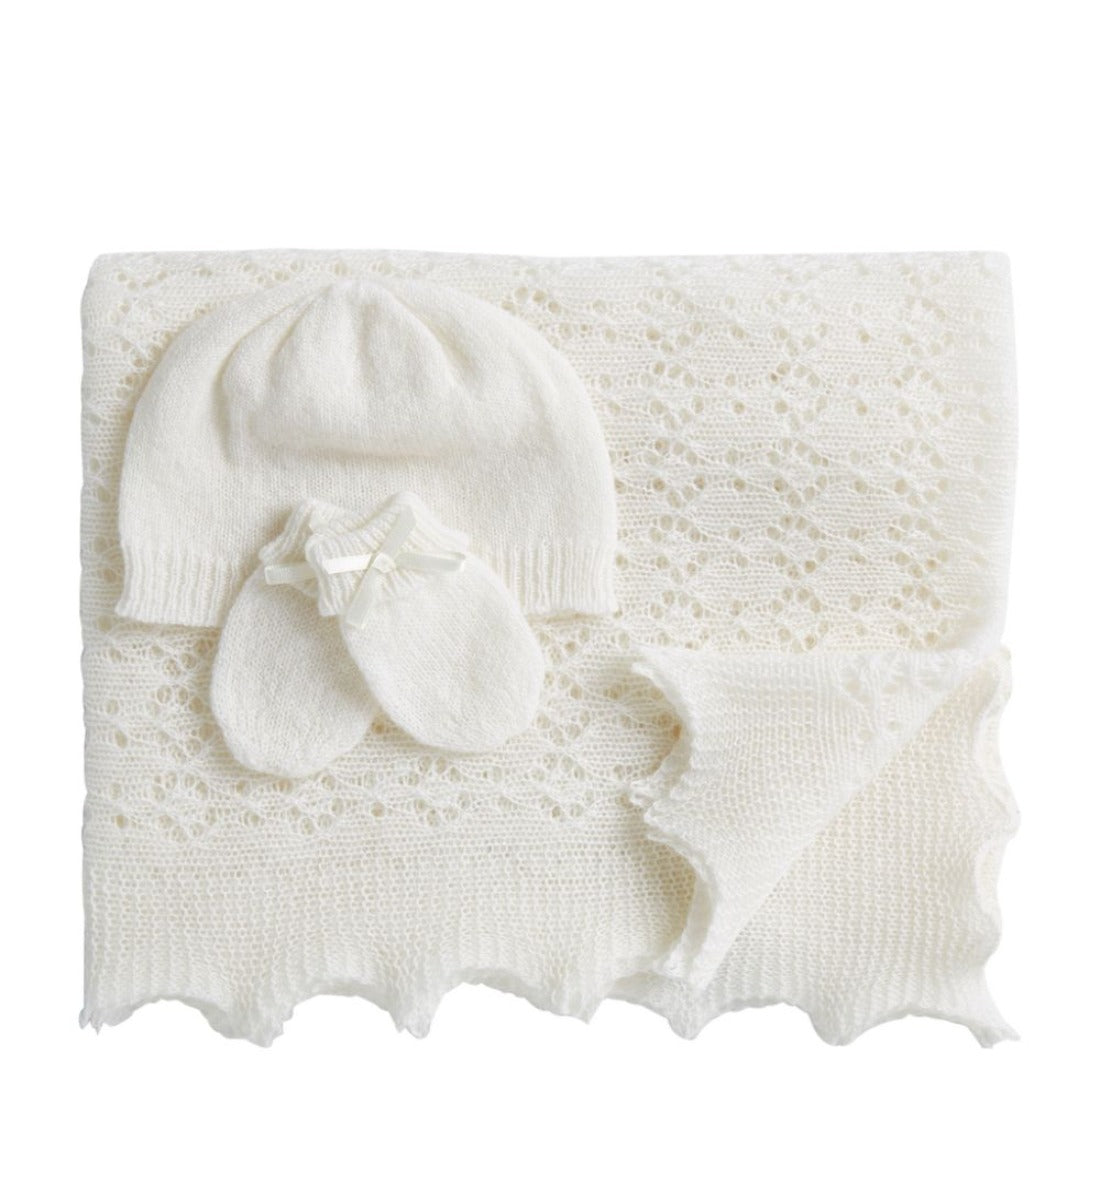 soft white baby cashmere shawl, hat and mittens 